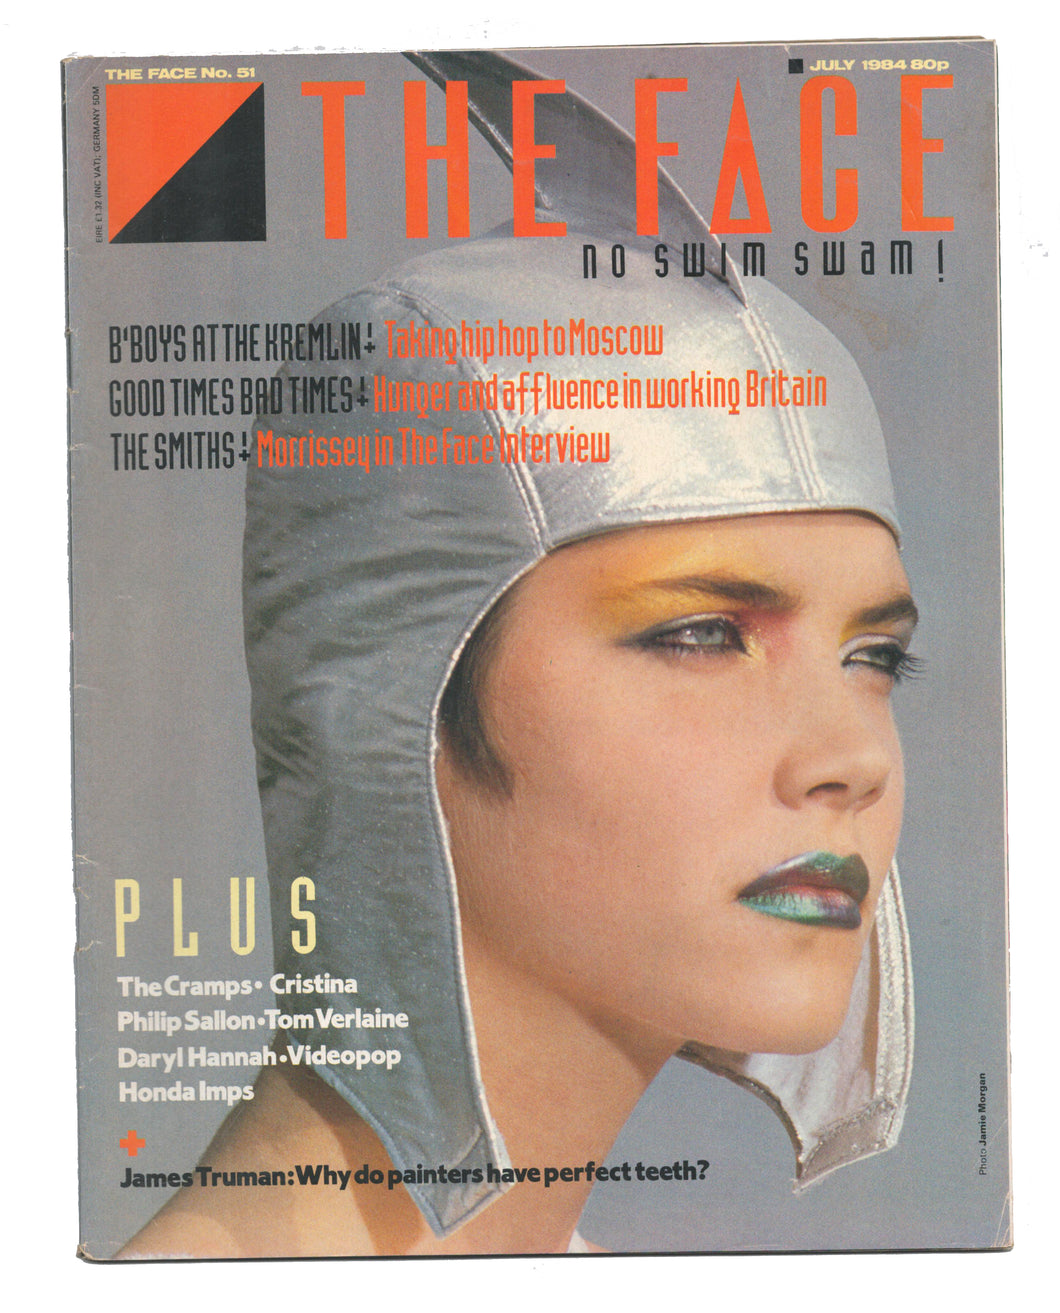 The Face No 51 July 1984